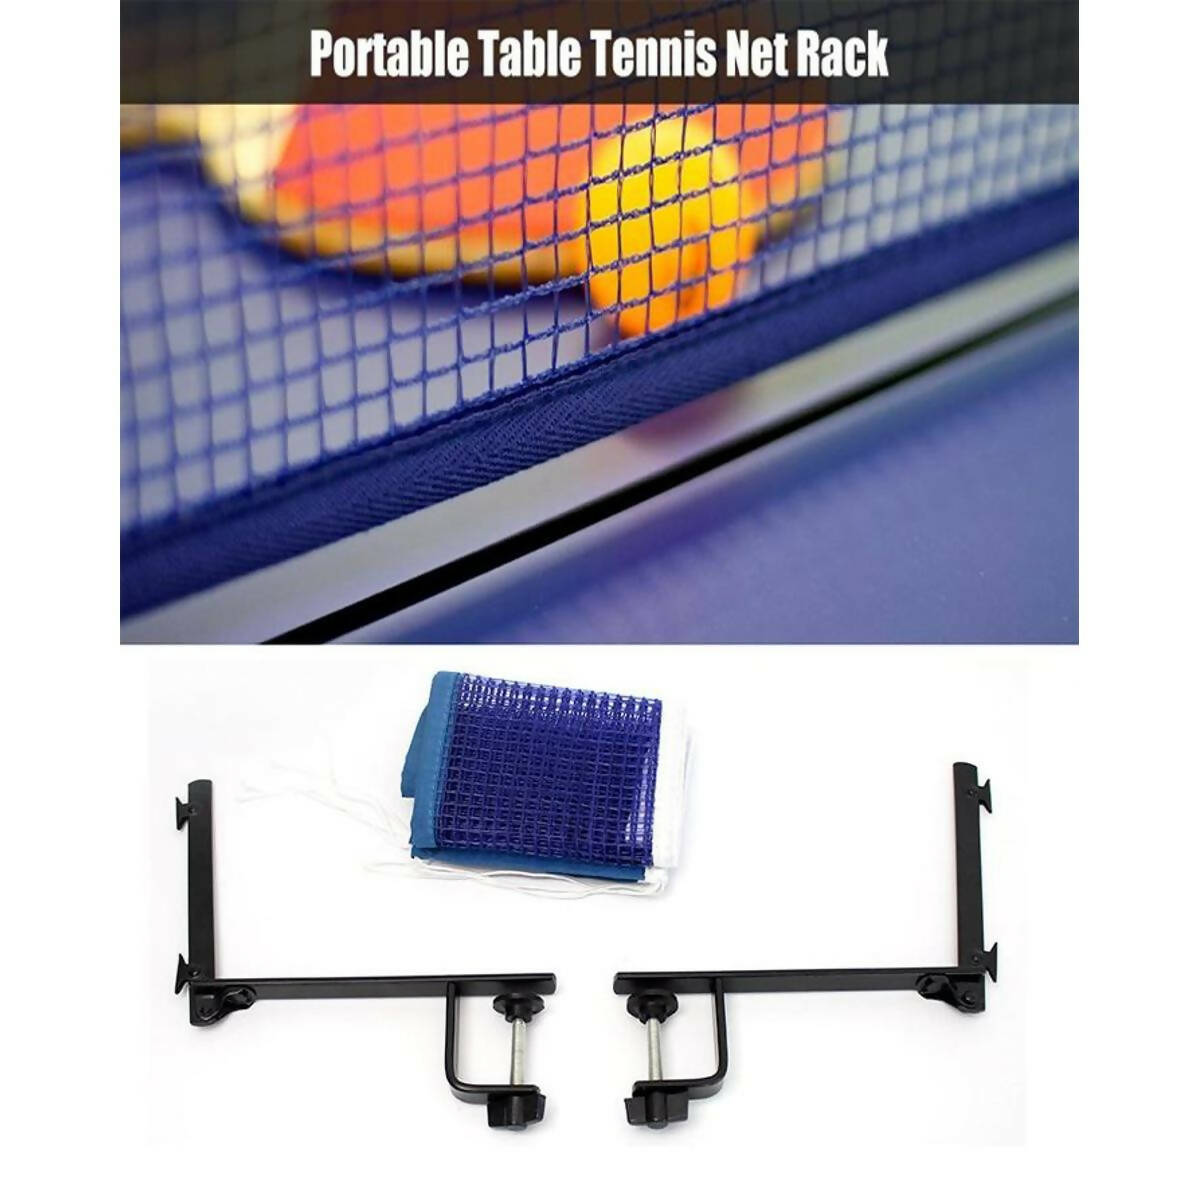 NEW Standard Portable Table Tennis Catcher Net With Metal Clamp Post Set